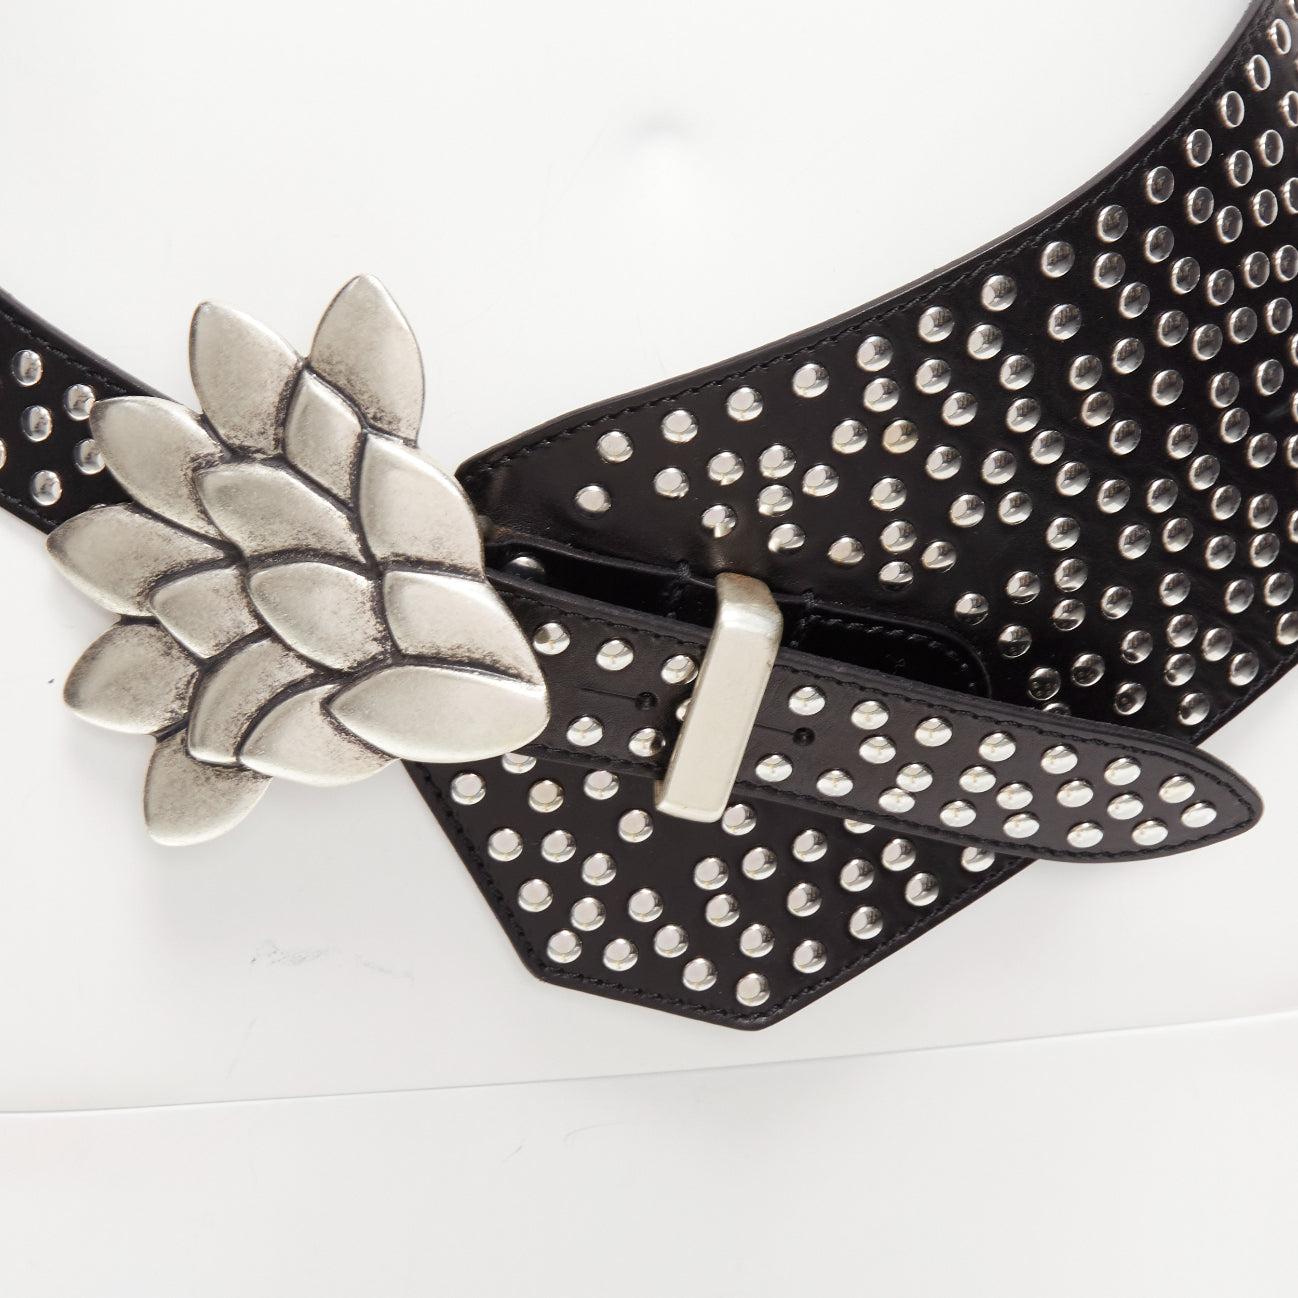 ISABEL MARANT Lowai silver petals buckle studded black leather wide belt S
Reference: AAWC/A01205
Brand: Isabel Marant
Model: Lowai
Material: Leather, Metal
Color: Black, Silver
Pattern: Studded
Closure: Hook & Bar
Lining: Black Leather
Made in: